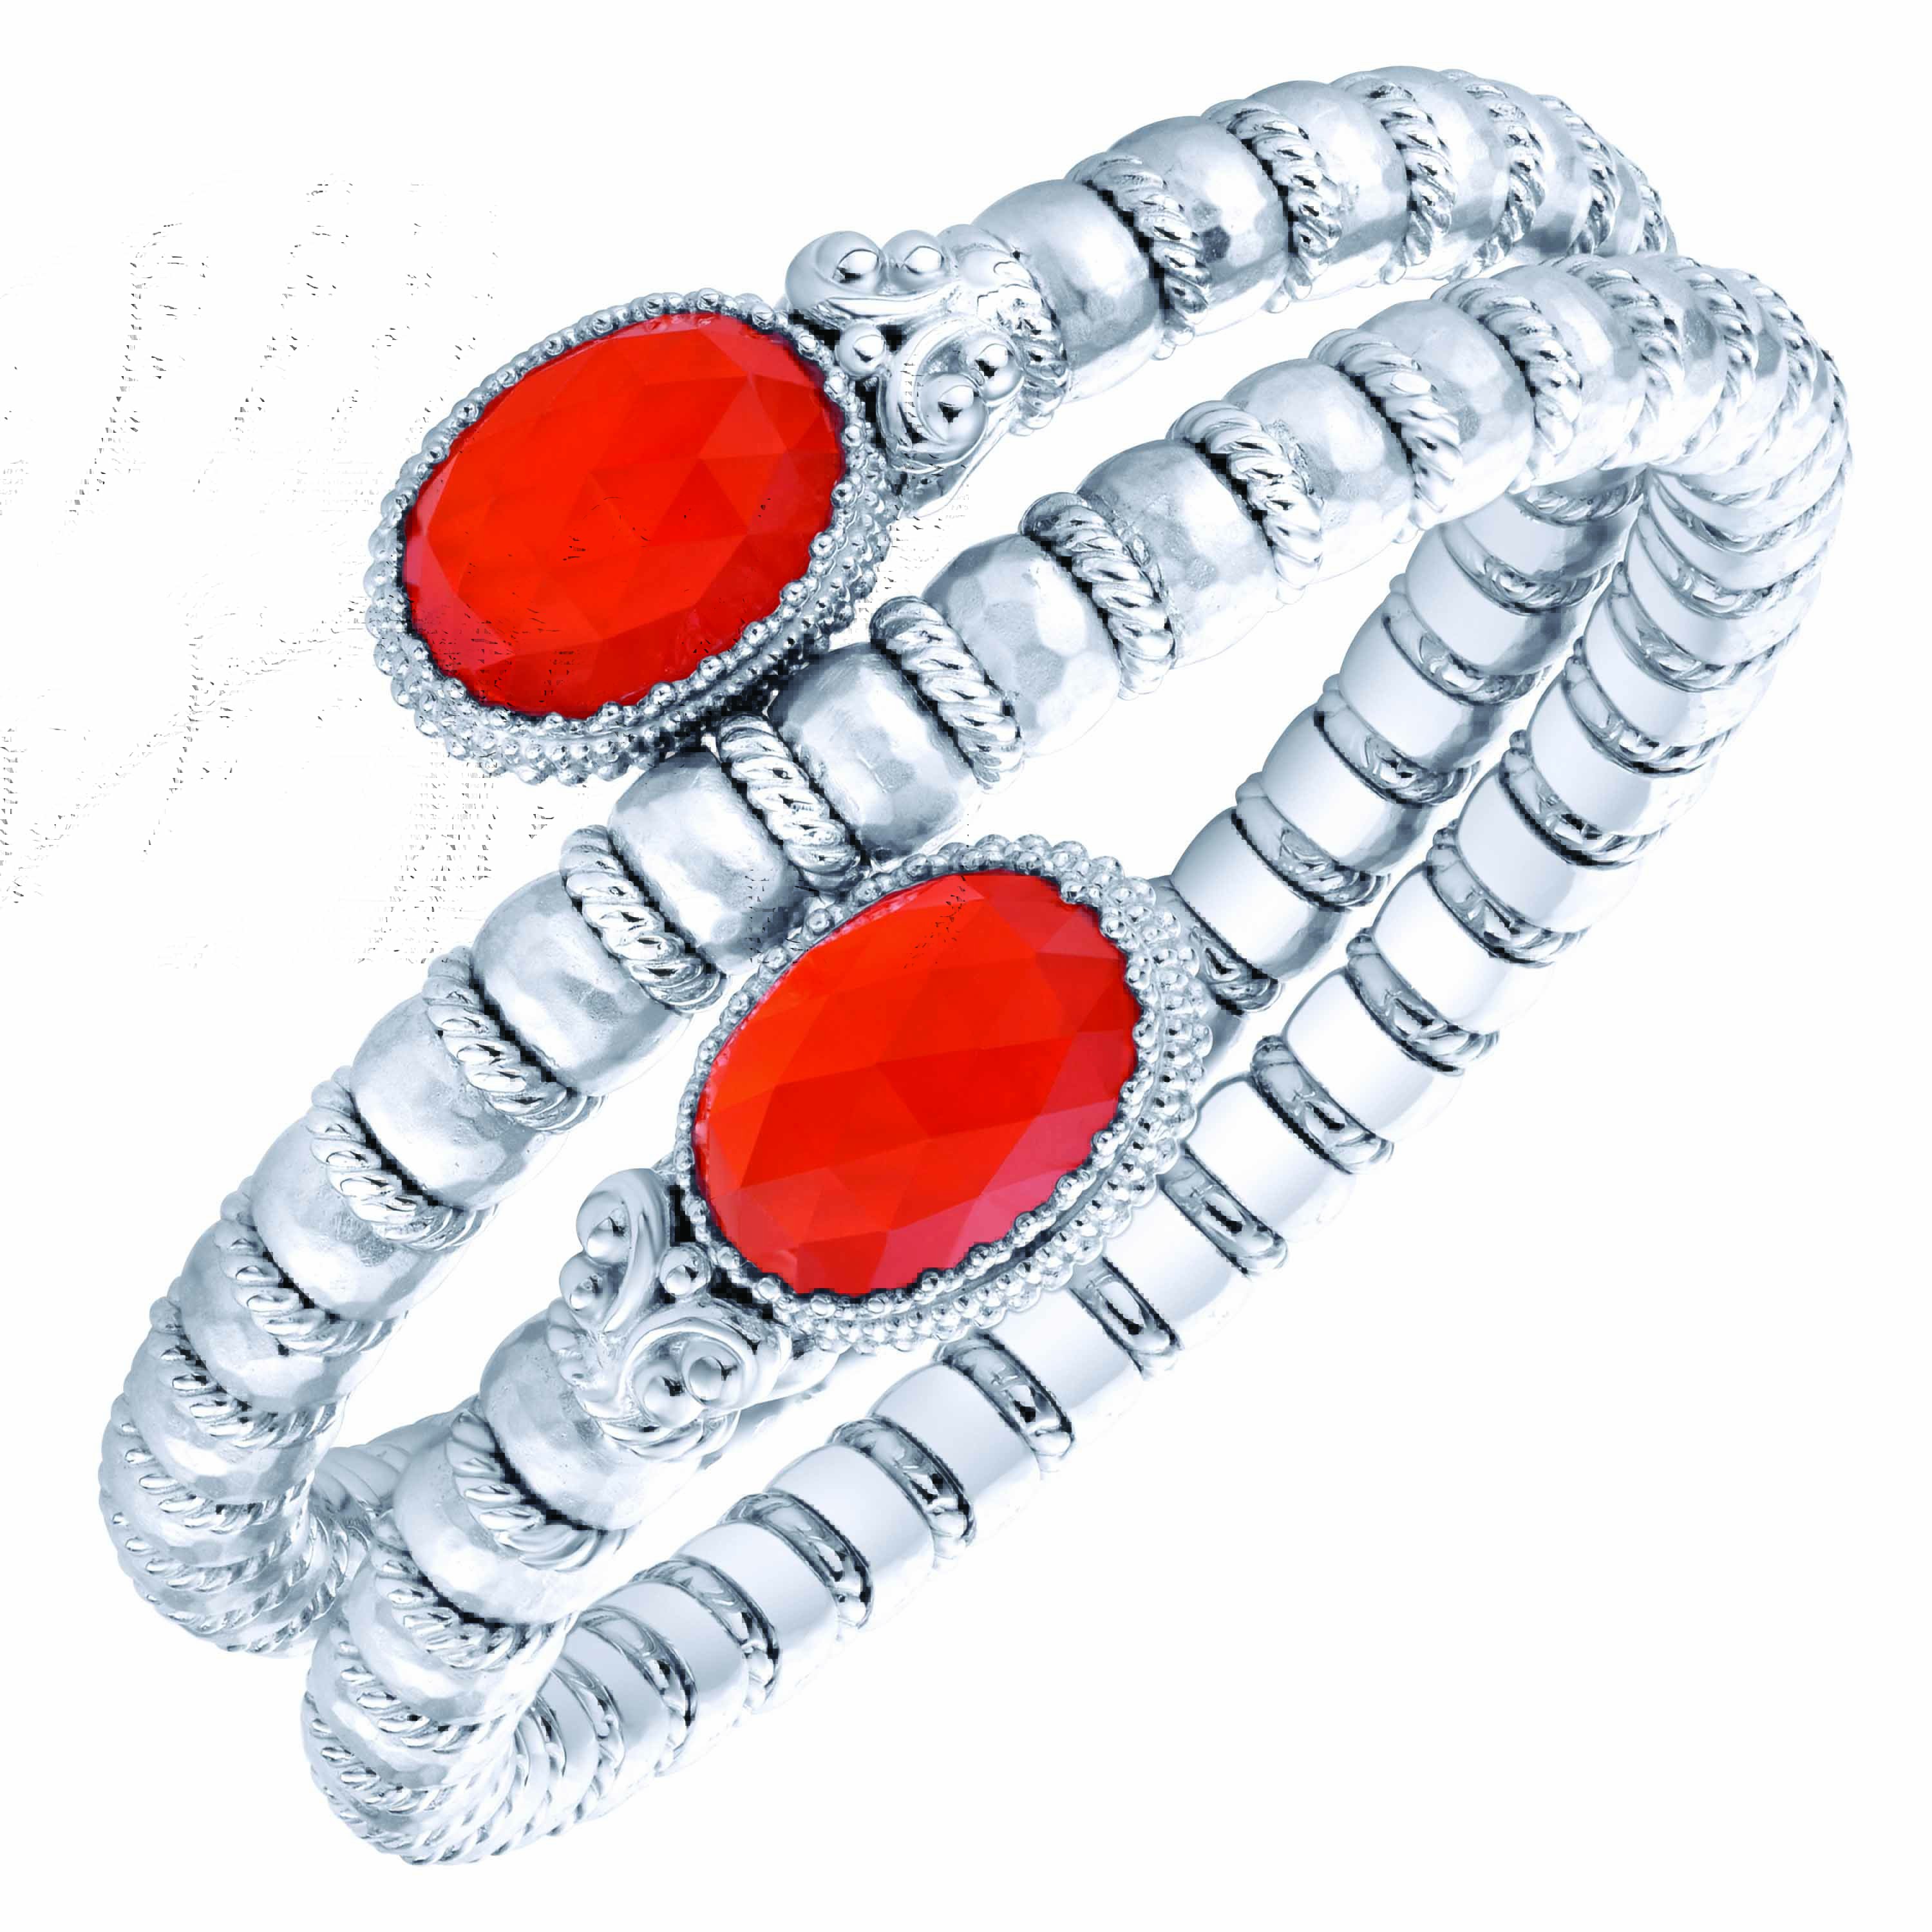 Sterling silver bracelet handmade with red onyx and white quartz